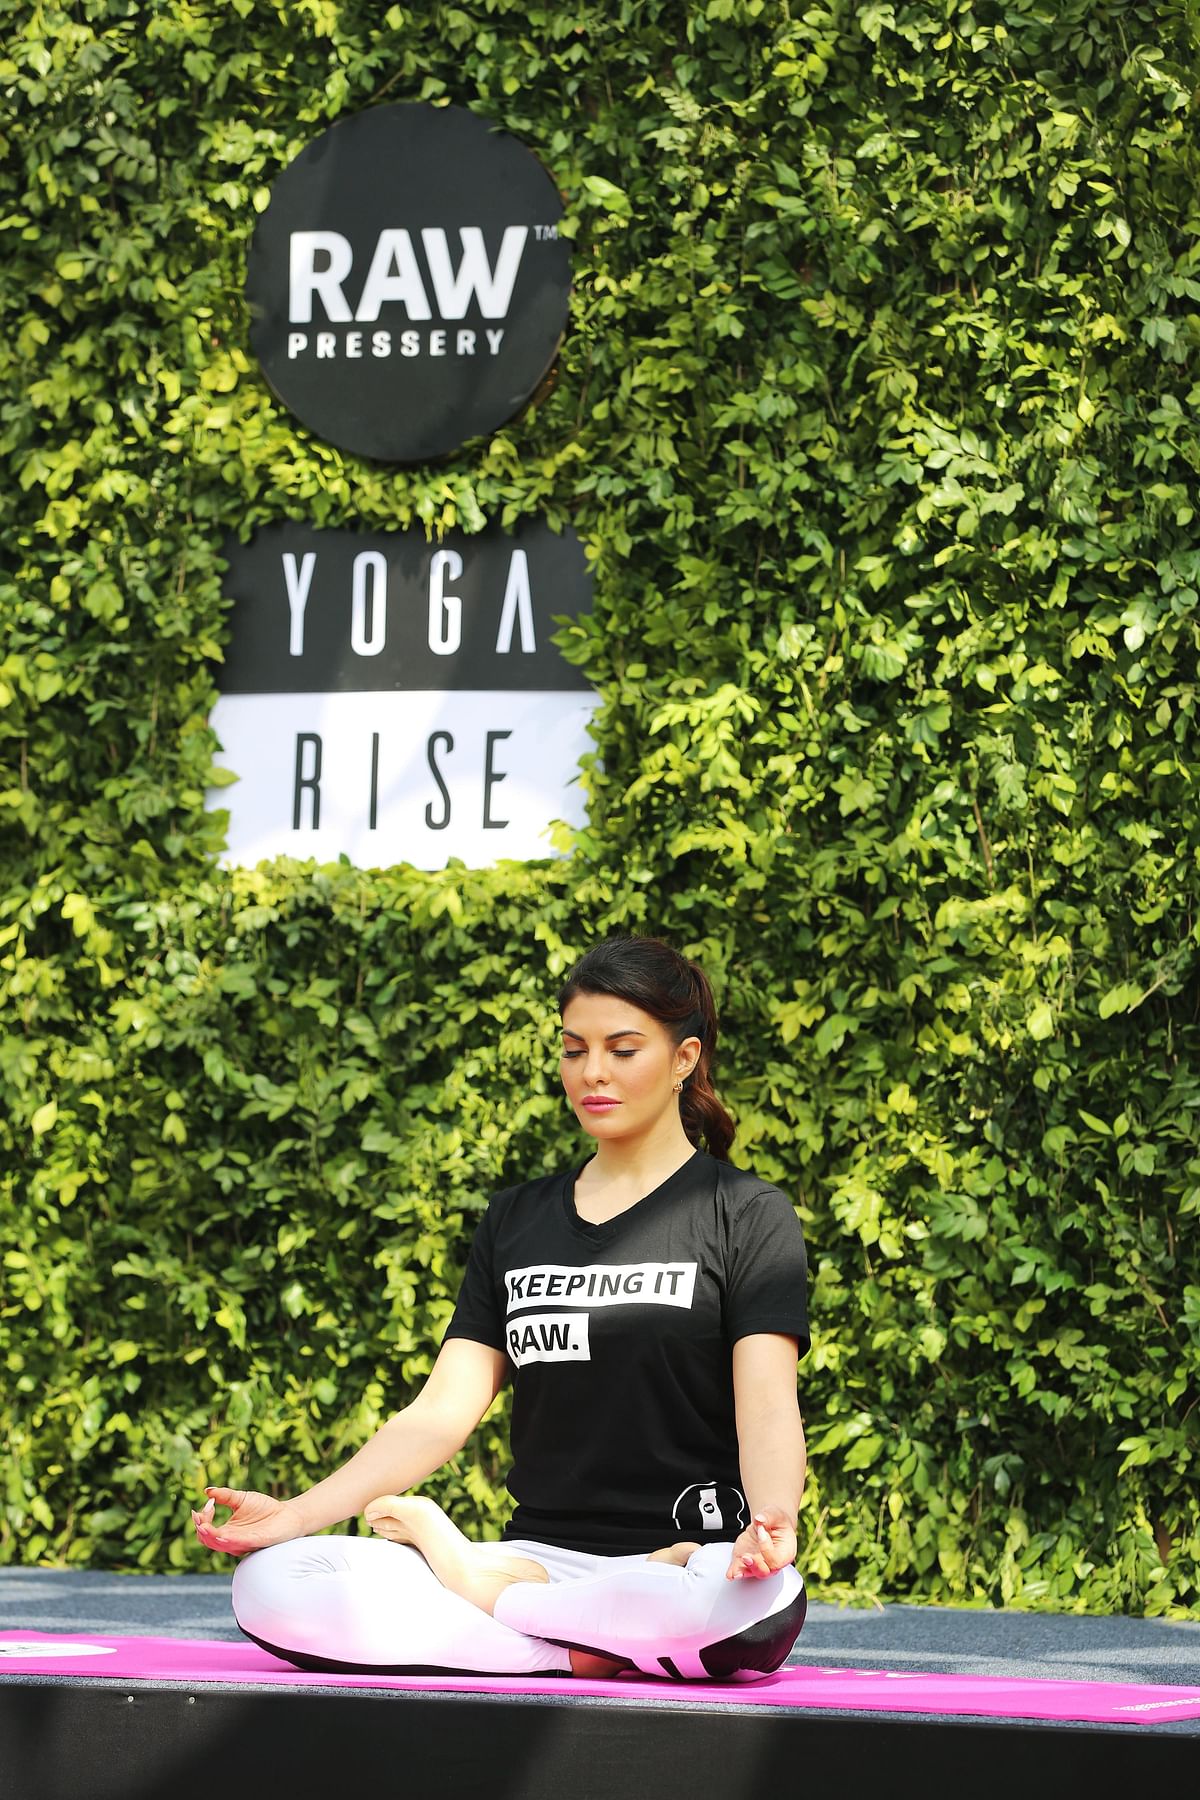 Actor and fitness enthusiast Jacqueline Fernandez was in Delhi recently where she shared Yoga and meditation tips.